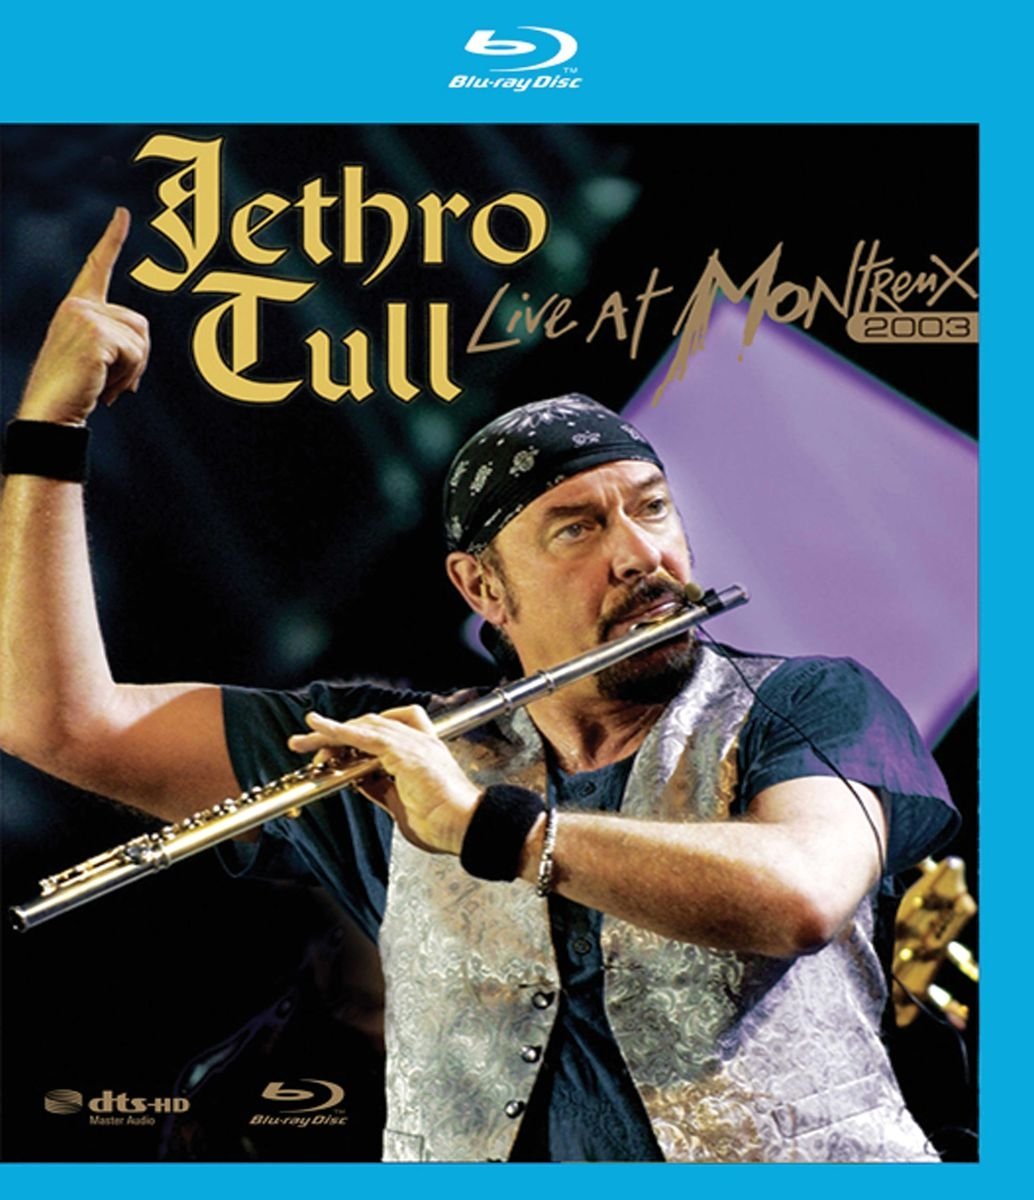 Jethro Tull - Live At Montreux 2003 [Blu-ray]